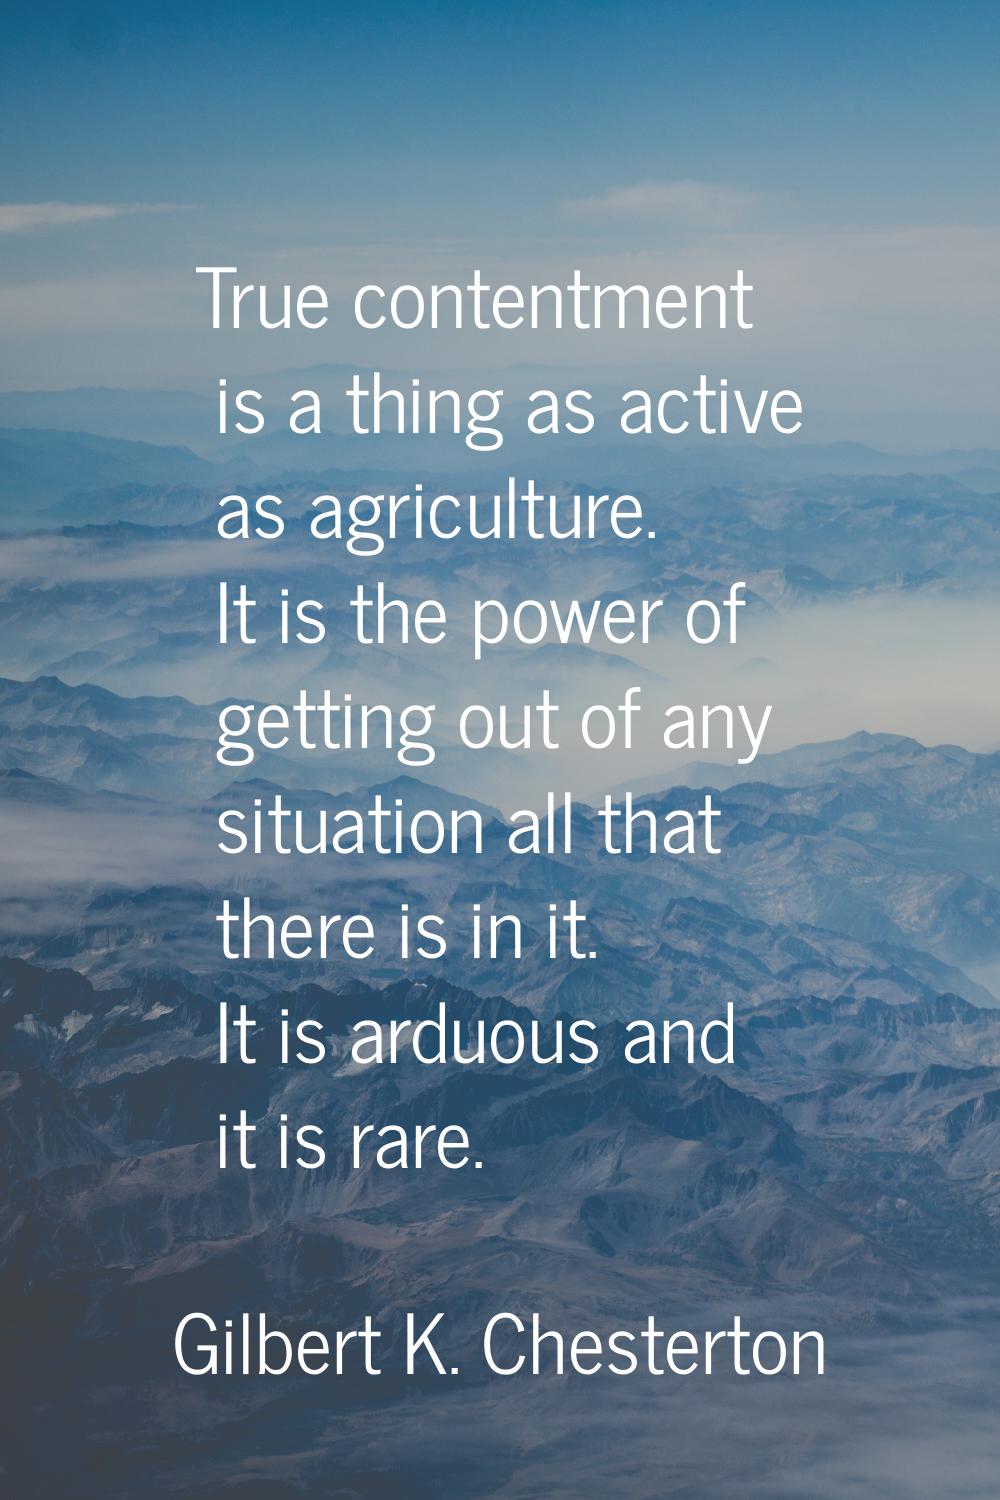 True contentment is a thing as active as agriculture. It is the power of getting out of any situati